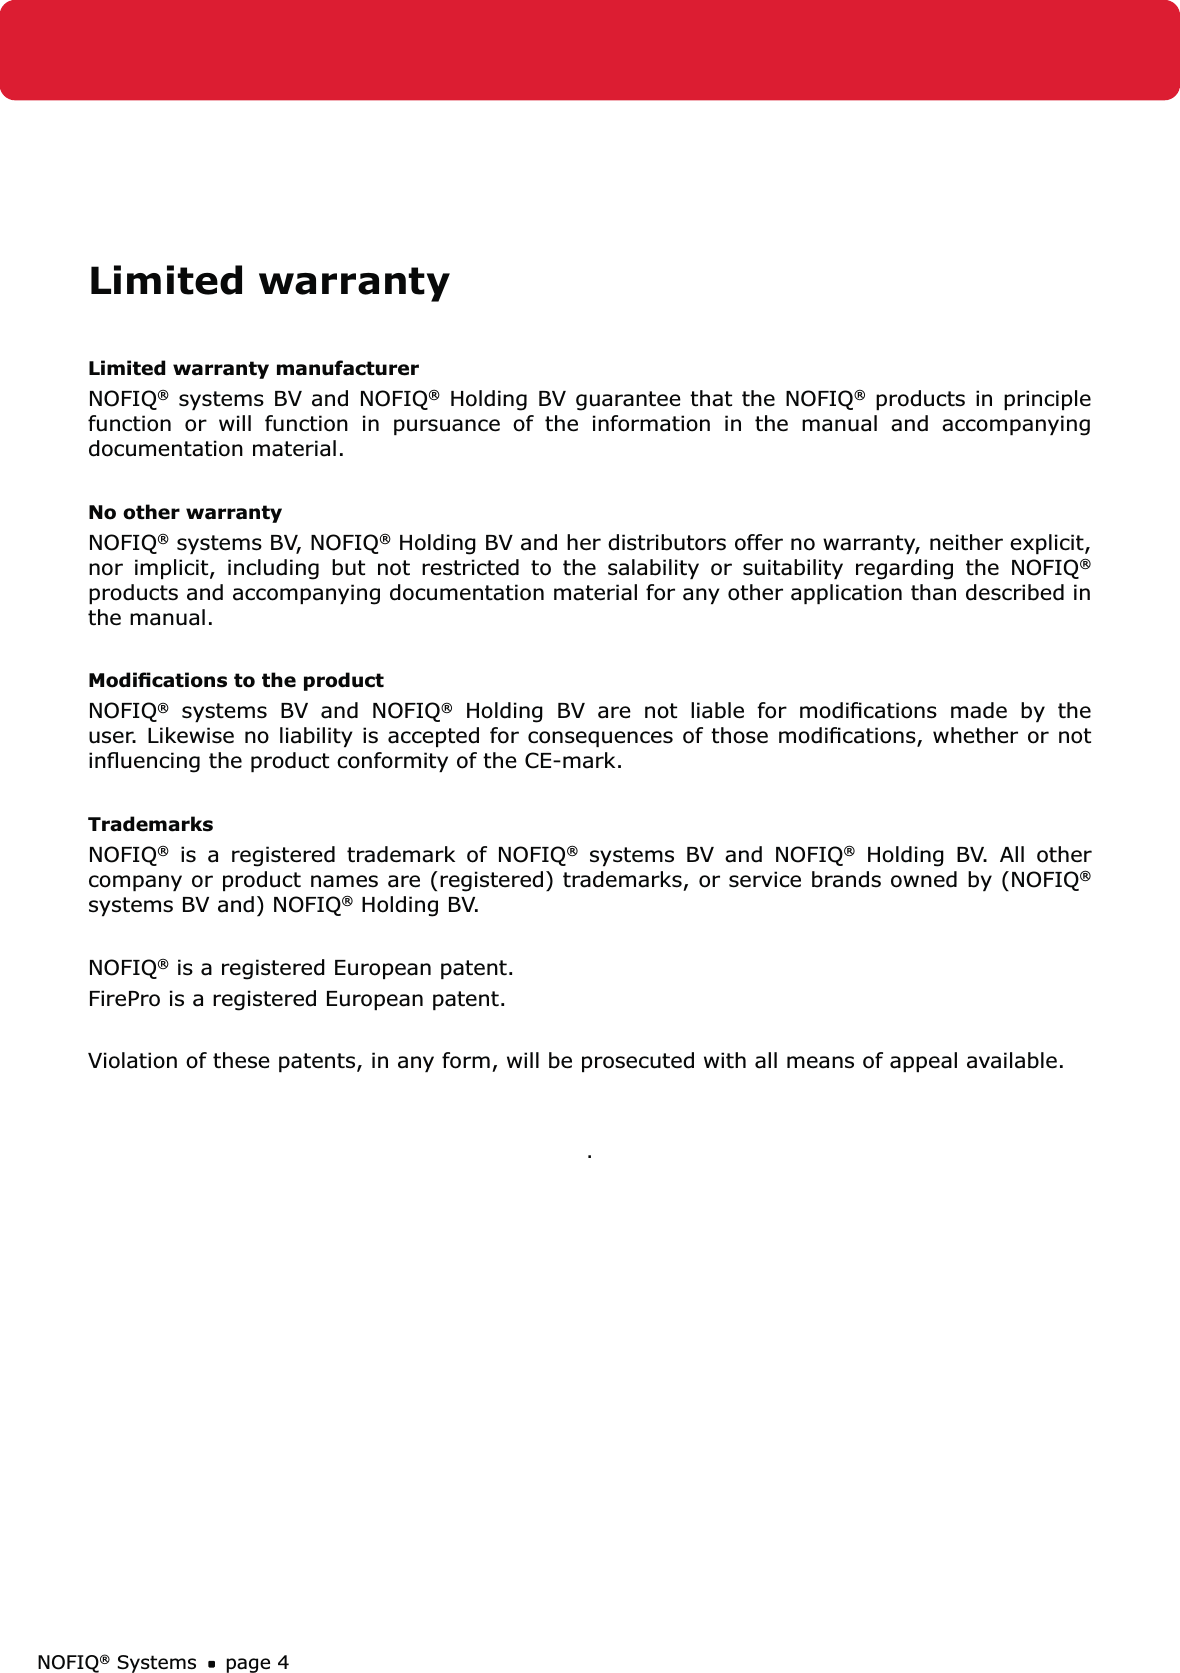 NOFIQ® Systems page 4Limited warrantyLimited warranty manufacturerNOFIQ® systems BV and NOFIQ® Holding BV guarantee that the NOFIQ® products in principle function or will function in pursuance of the information in the manual and accompanying documentation material. No other warranty NOFIQ® systems BV, NOFIQ® Holding BV and her distributors offer no warranty, neither explicit, nor implicit, including but not restricted to the salability or suitability regarding the NOFIQ® products and accompanying documentation material for any other application than described in the manual.Modiﬁcations to the productNOFIQ® systems BV and NOFIQ® Holding BV are not liable for modiﬁcations made by the user. Likewise no liability is accepted for consequences of those modiﬁcations, whether or not inﬂuencing the product conformity of the CE-mark.TrademarksNOFIQ® is a registered trademark of NOFIQ® systems BV and NOFIQ® Holding BV. All other company or product names are (registered) trademarks, or service brands owned by (NOFIQ® systems BV and) NOFIQ® Holding BV. NOFIQ® is a registered European patent.FirePro is a registered European patent.Violation of these patents, in any form, will be prosecuted with all means of appeal available..